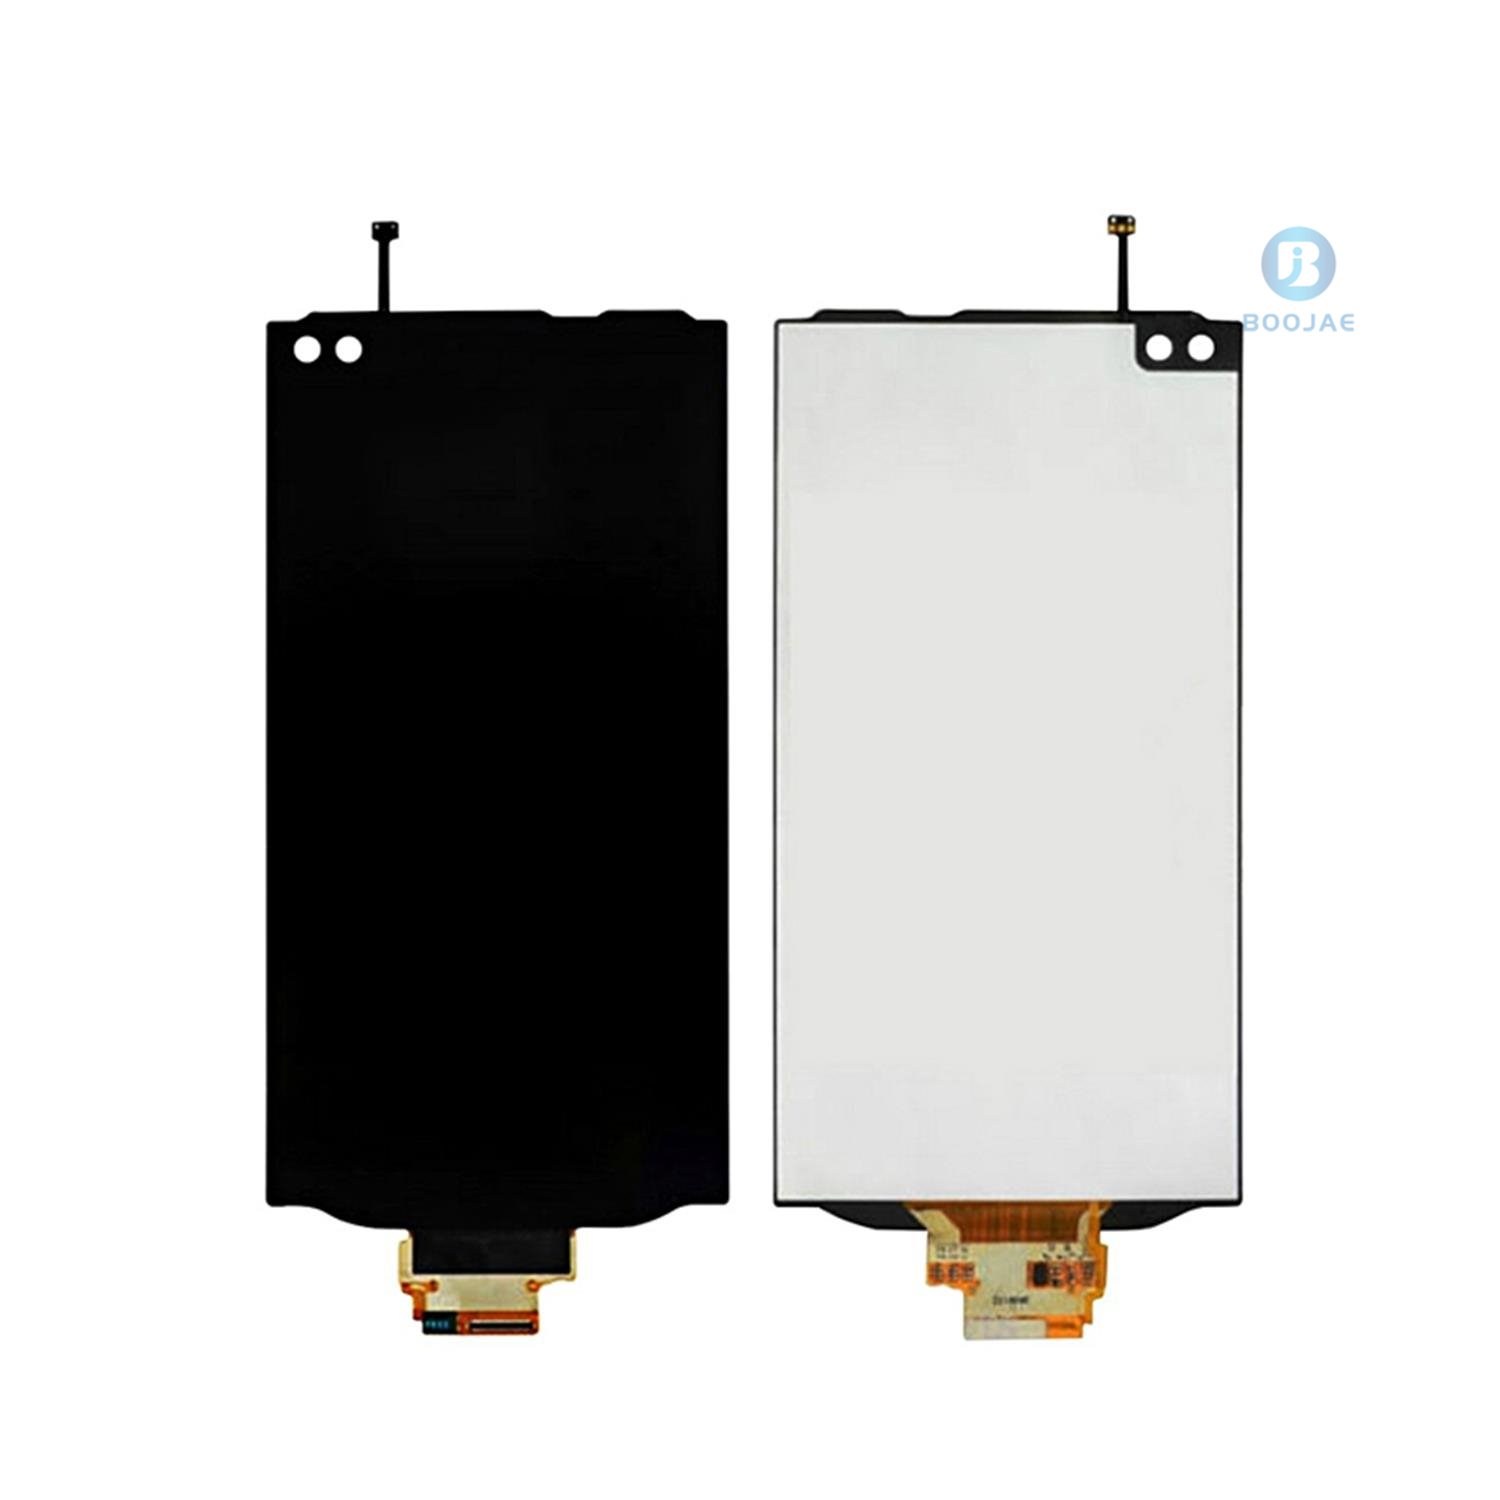 LG V10 LCD Screen Display, Lcd Assembly Replacement